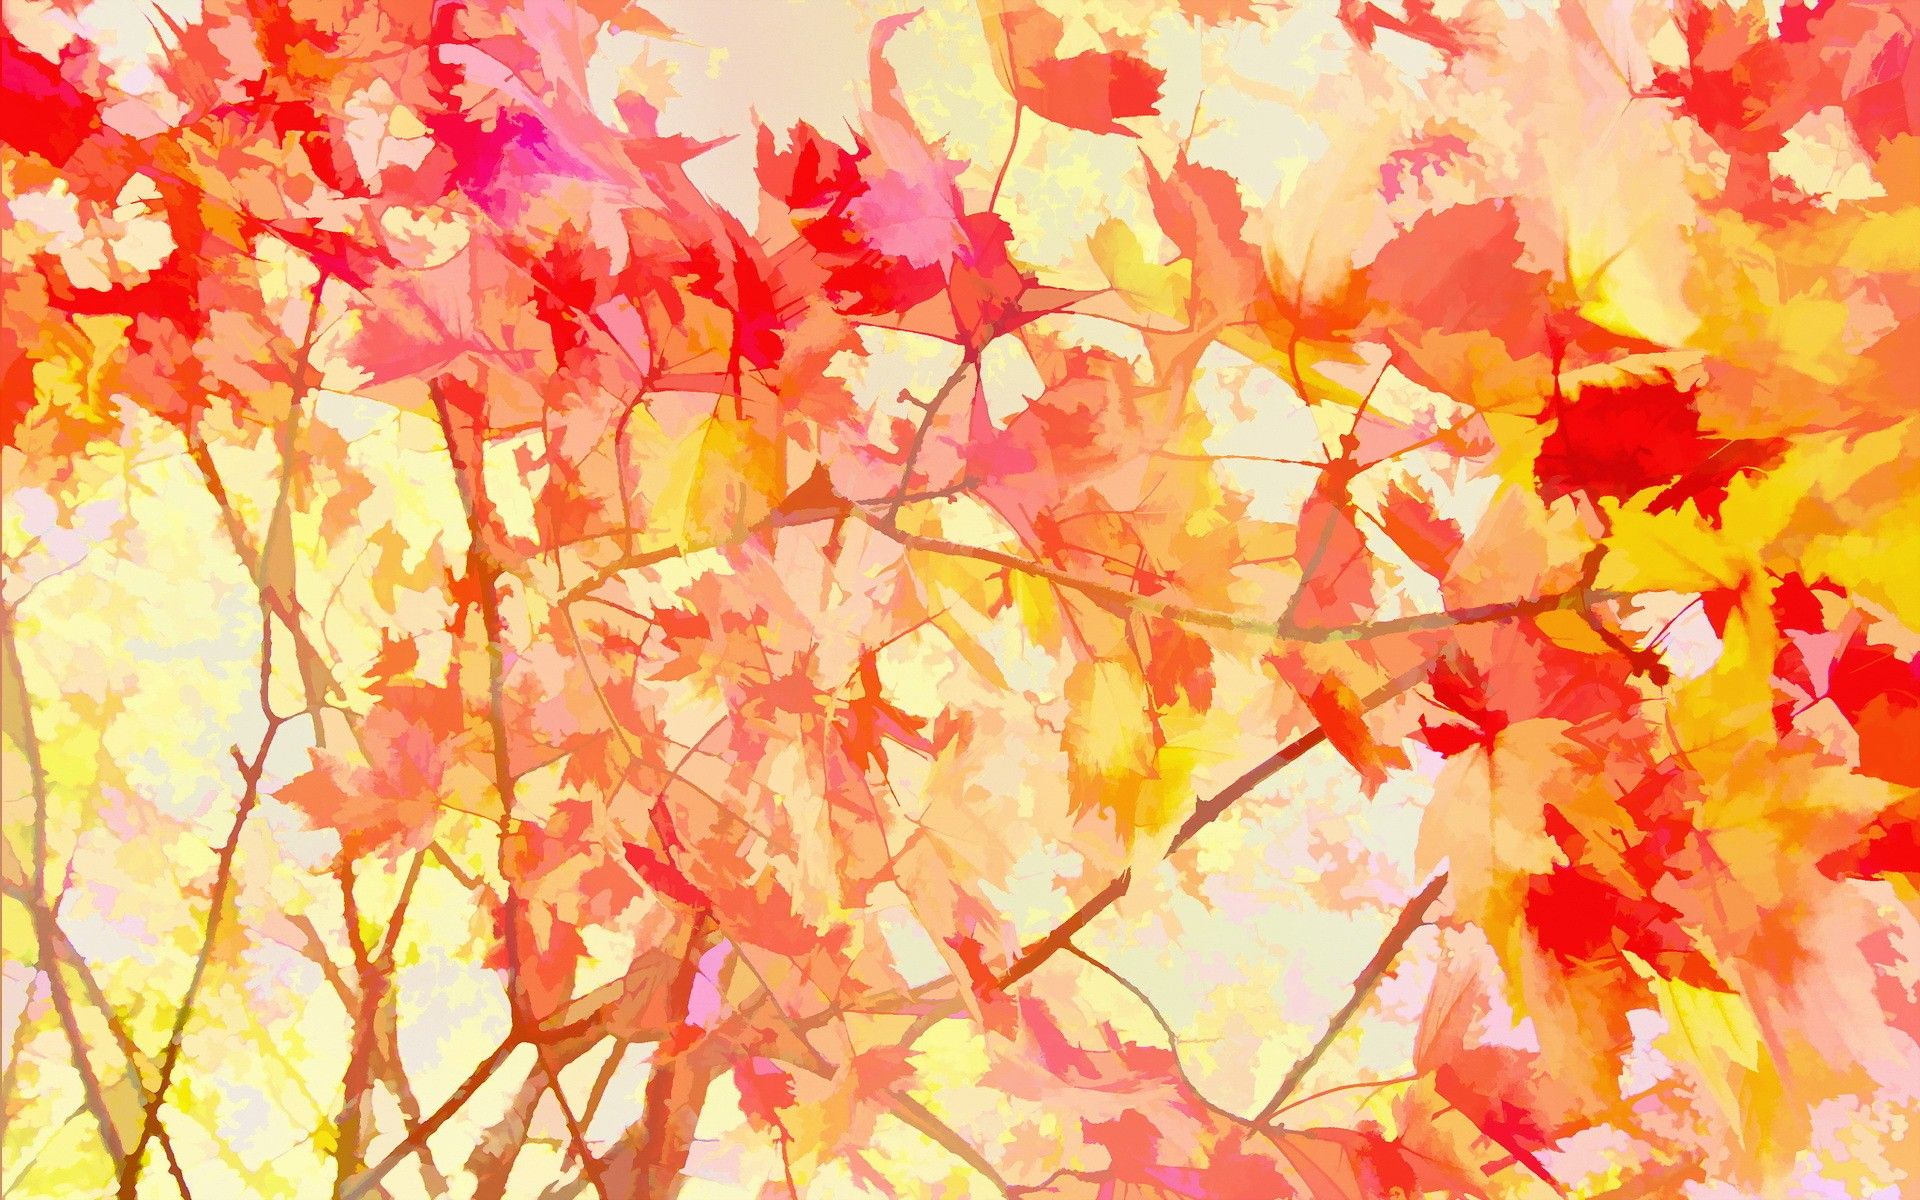 Monotype, Art, Pattern, Leaves, Colored, Autumn, HD, Wallpaper, Download Wallpaper, Amazing, Cool, 1920x1200